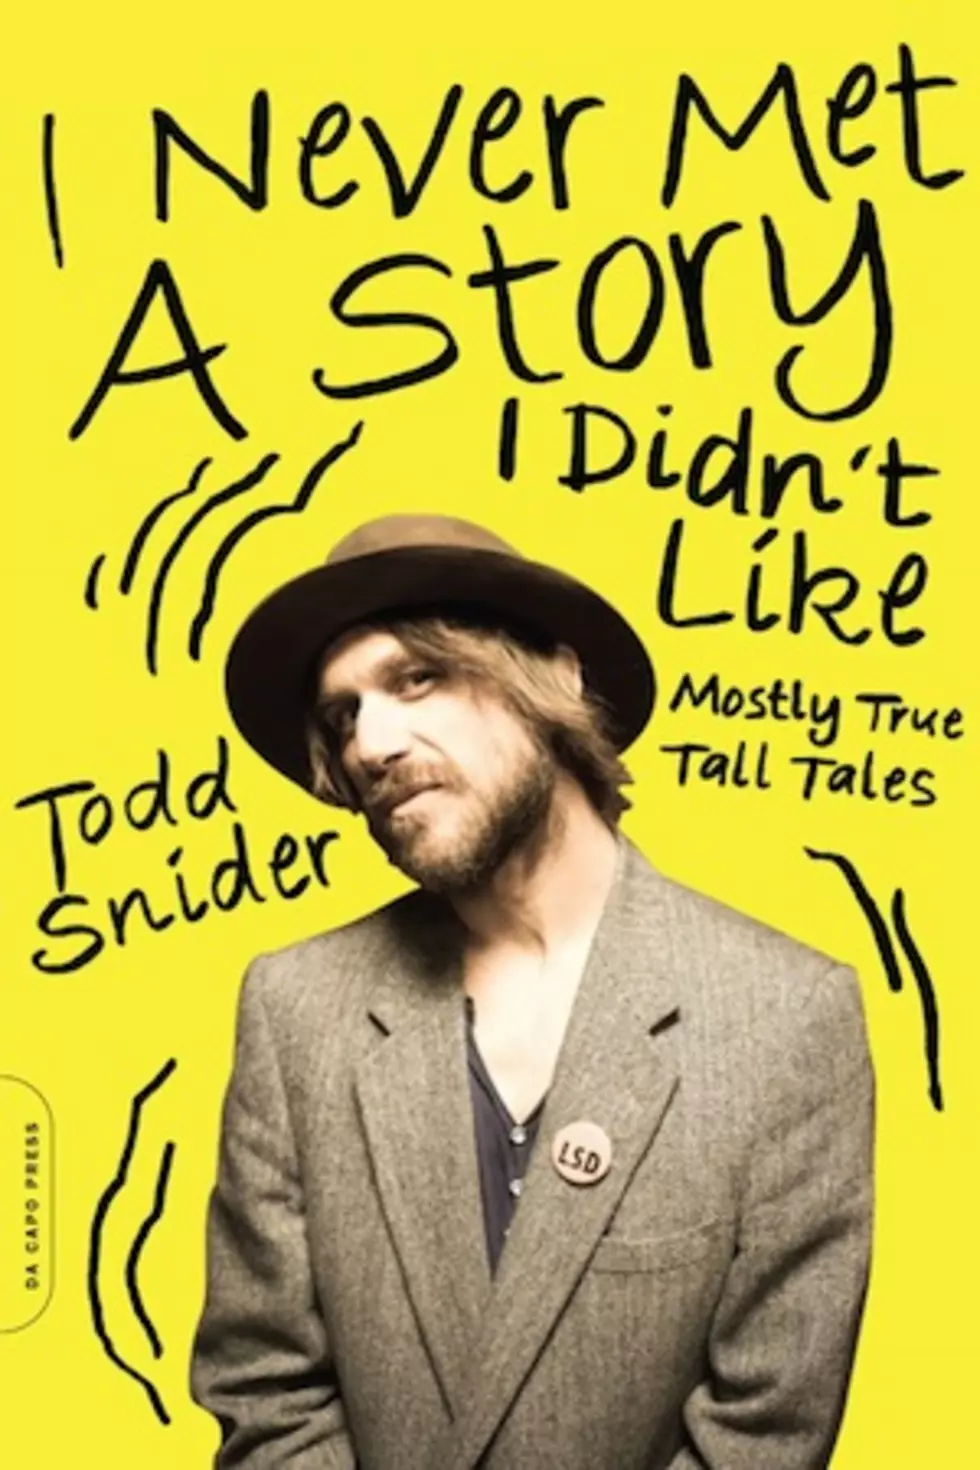 Todd Snider Releases Book of Stories